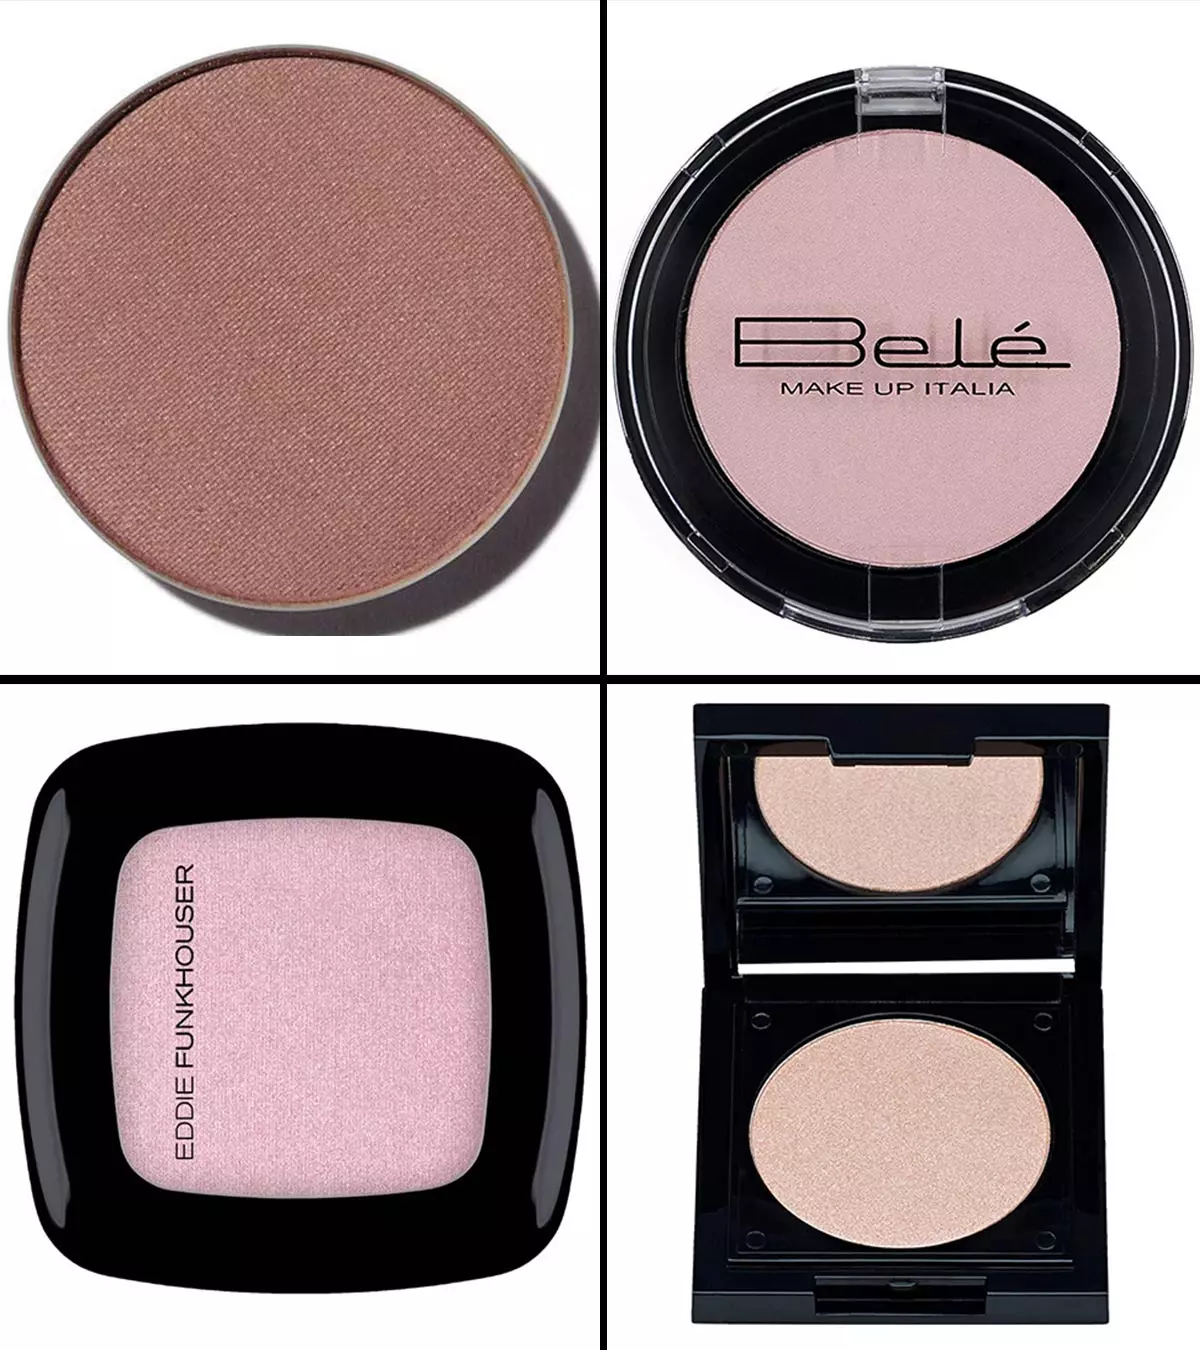 15 Best Single Eyeshadows For A Glamorous Look, Makeup Artist Approved